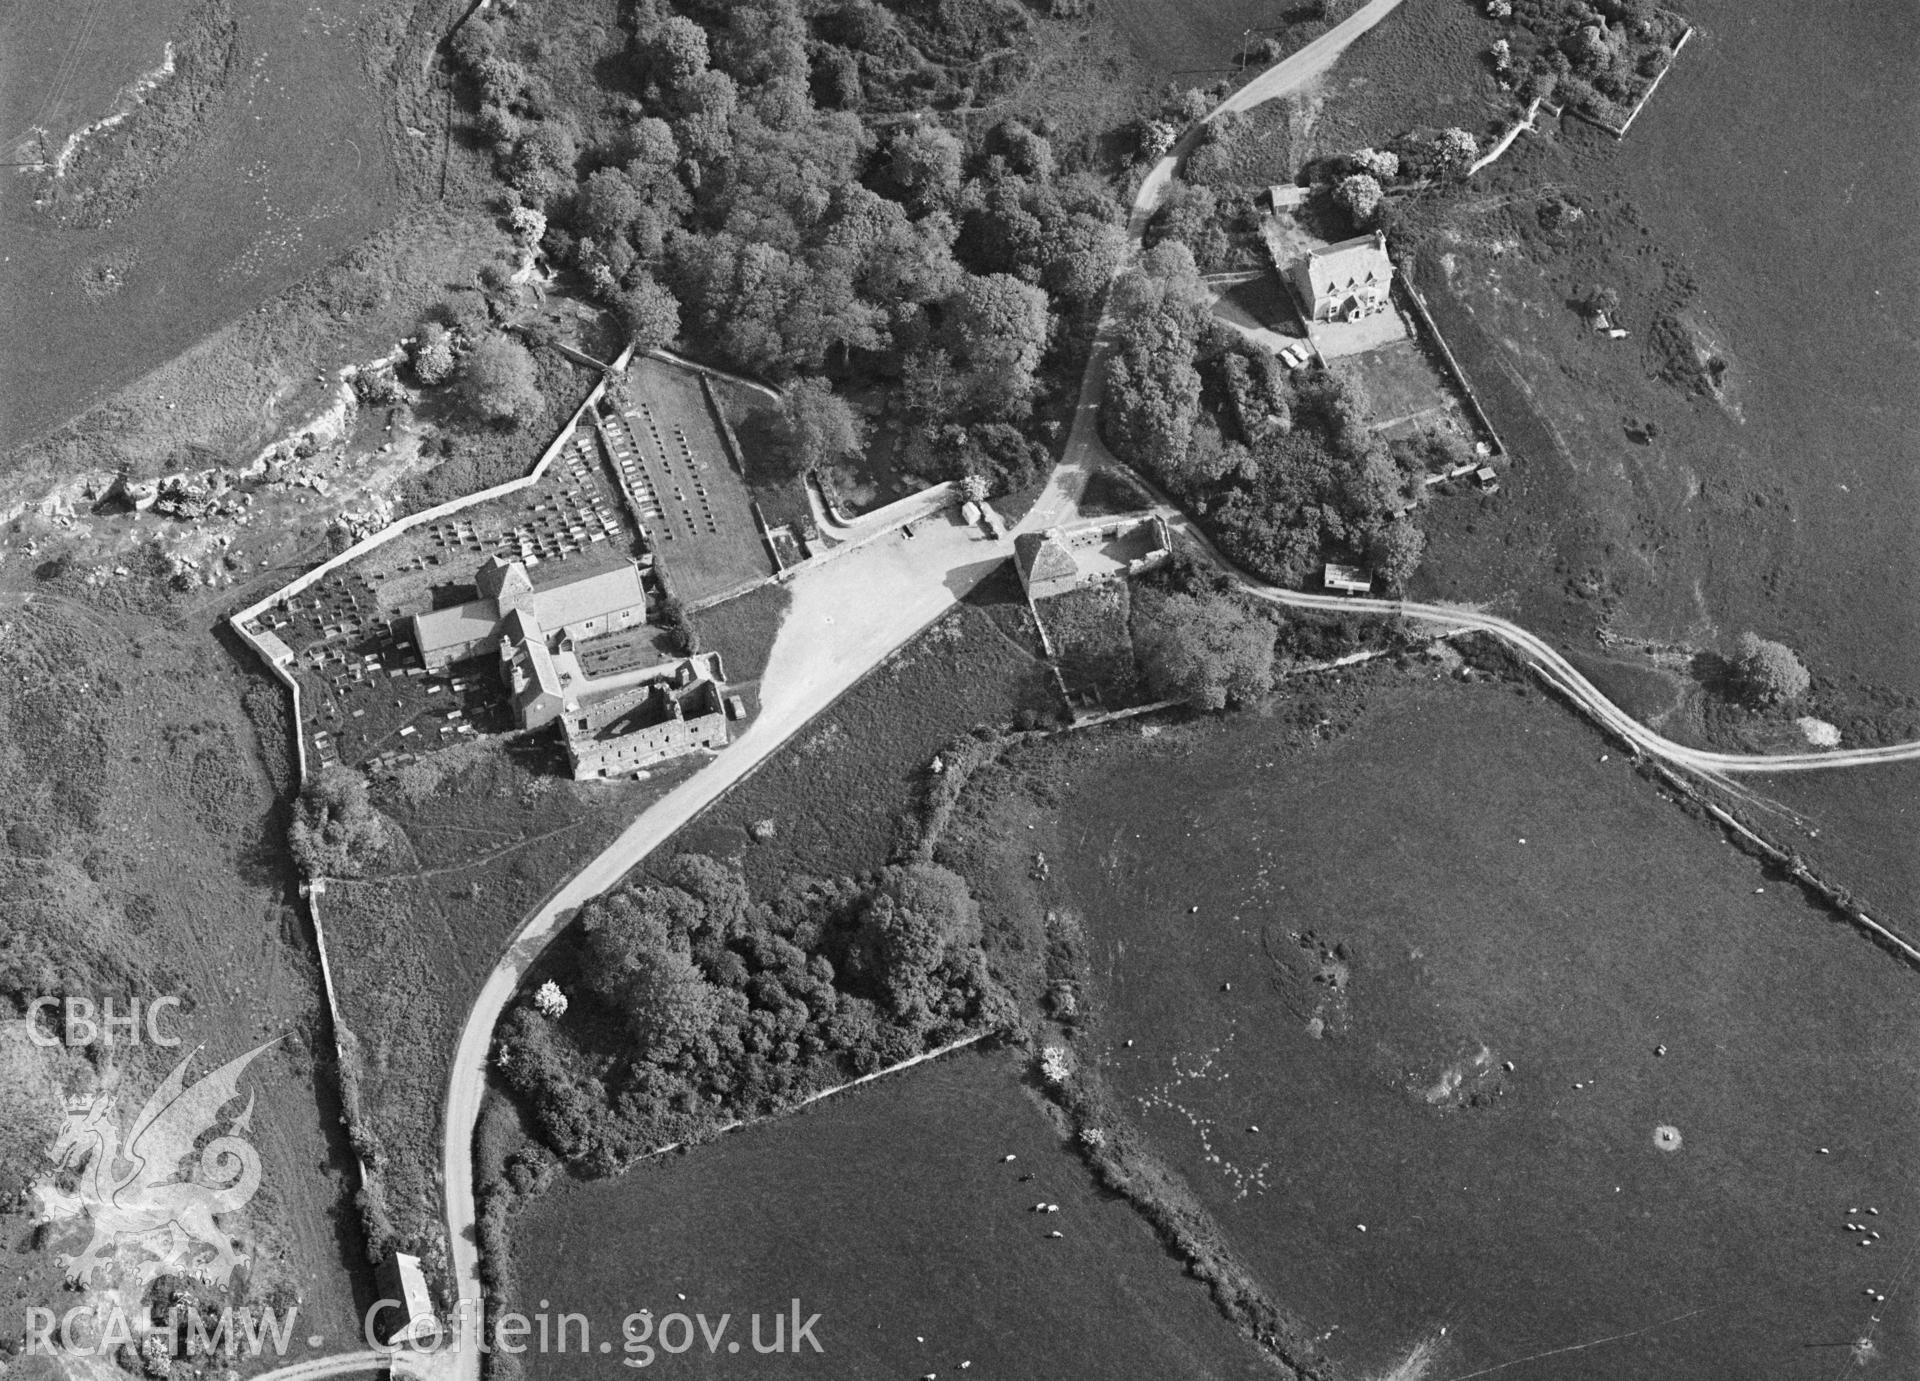 RCAHMW Black and white oblique aerial photograph of Penmon Priory, Penmon, taken by C.R. Musson, 30/05/94